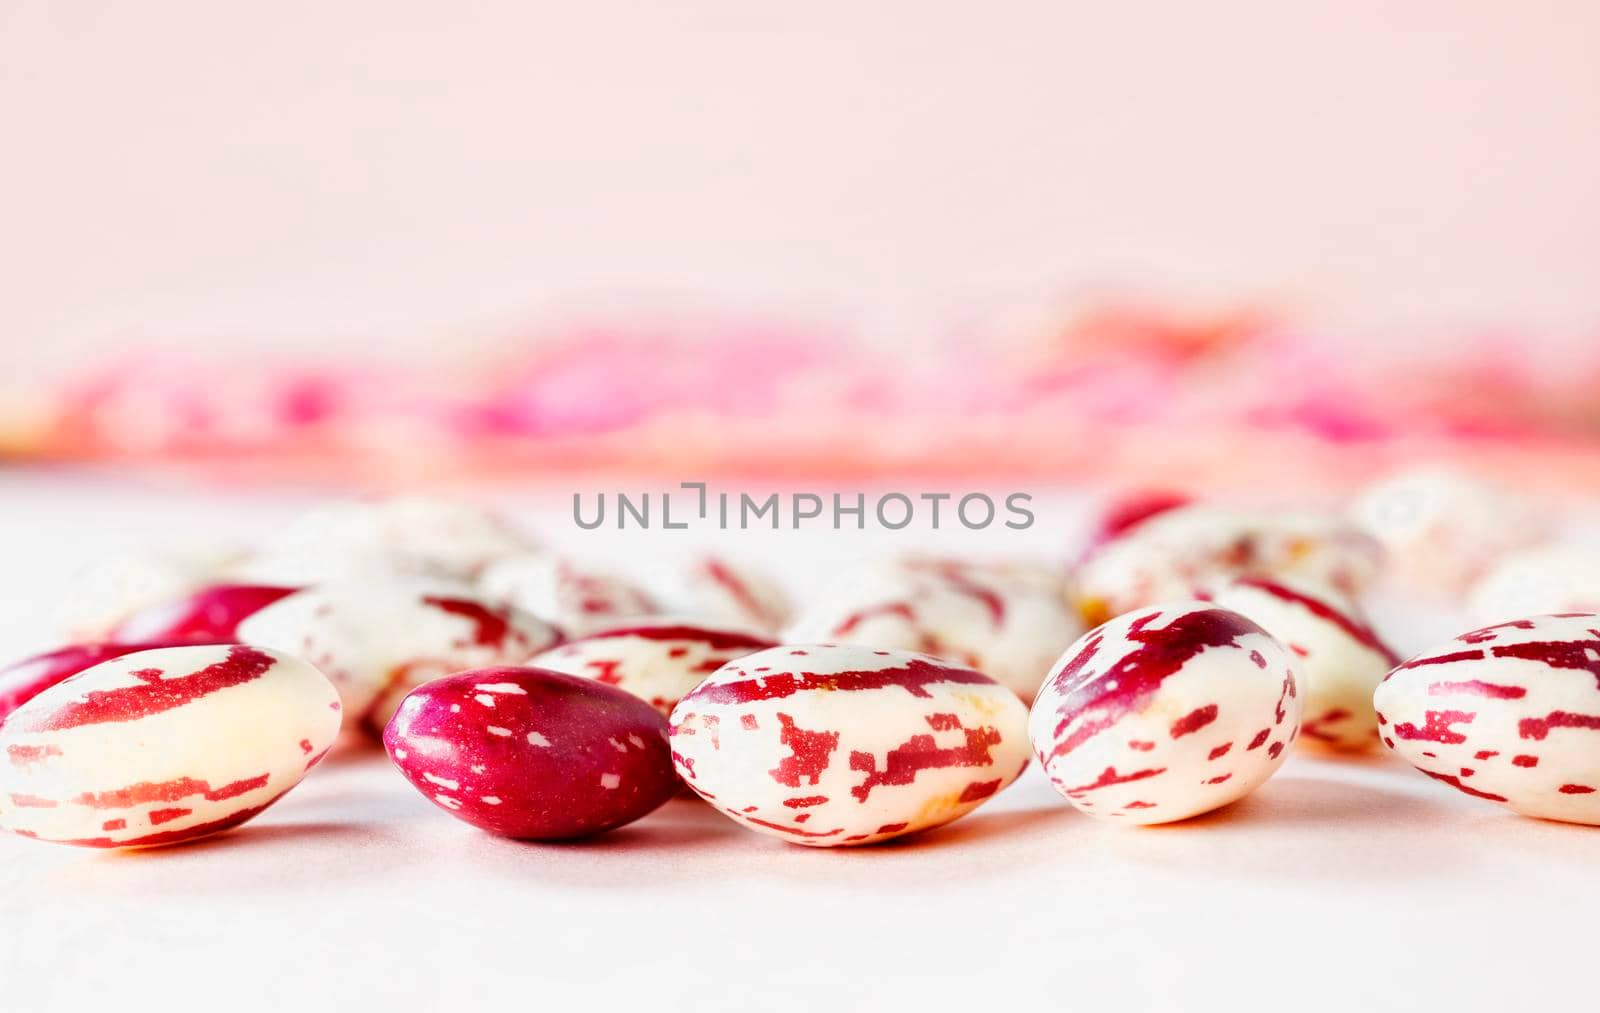 Fresh borlotti beans on table beans with red specks on creamy white background , common beans or pinto beans